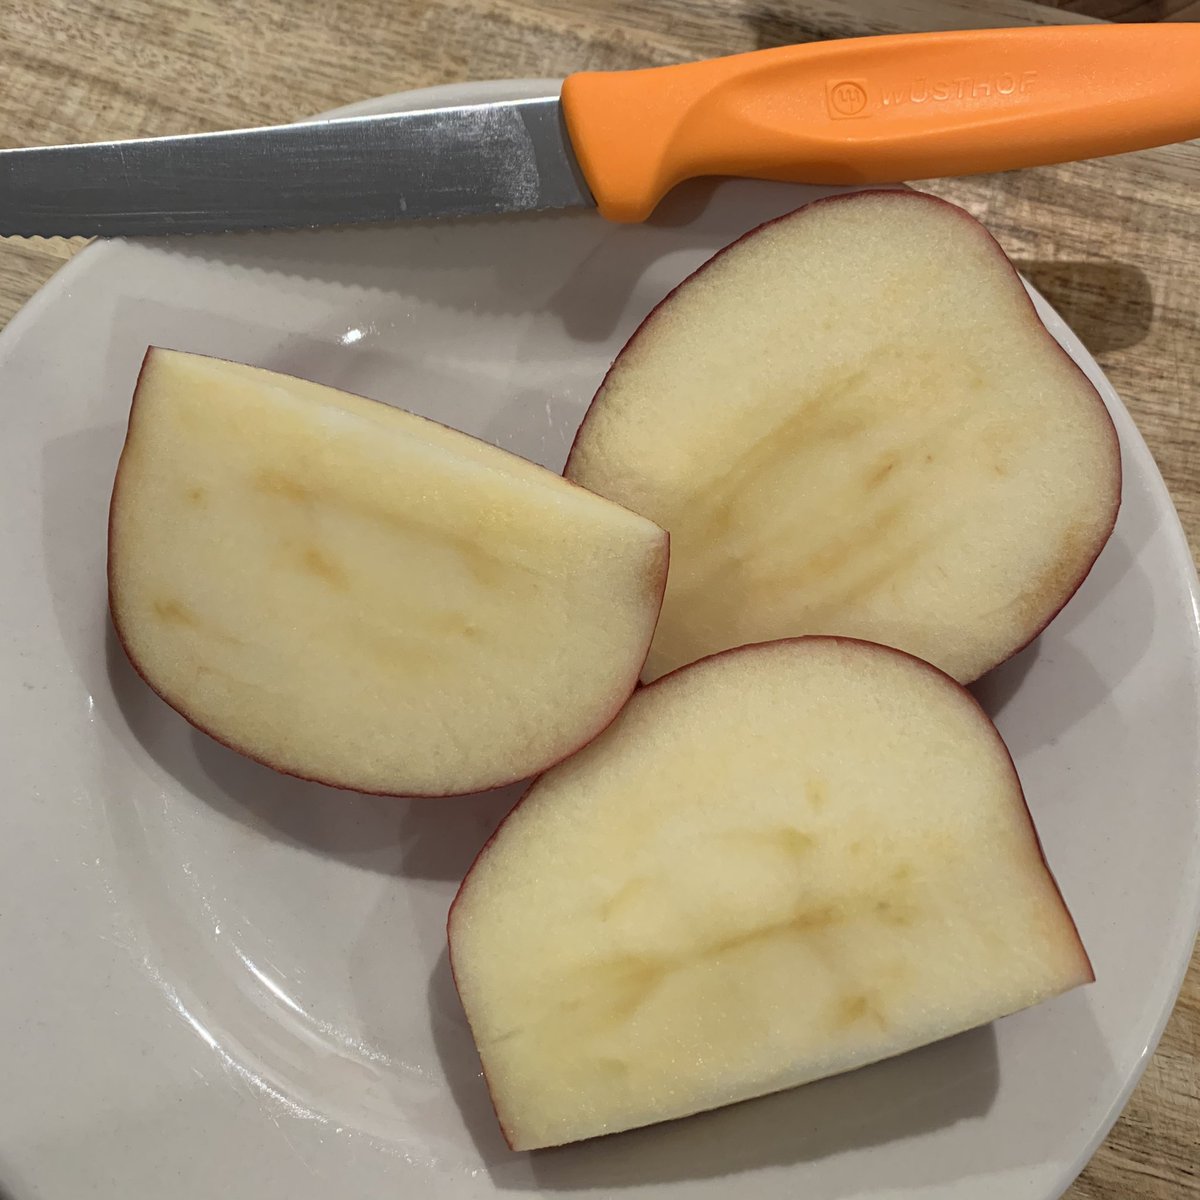 Time for apple reviews! First up: “Mother,” an heirloom from Boston (1840). Slightly mealy texture but nice, standard apple flavor. I was told to look for “hints of wintergreen and spruce” — nope, definitely tastes just like a regular, kinda boring apple. 5/10 